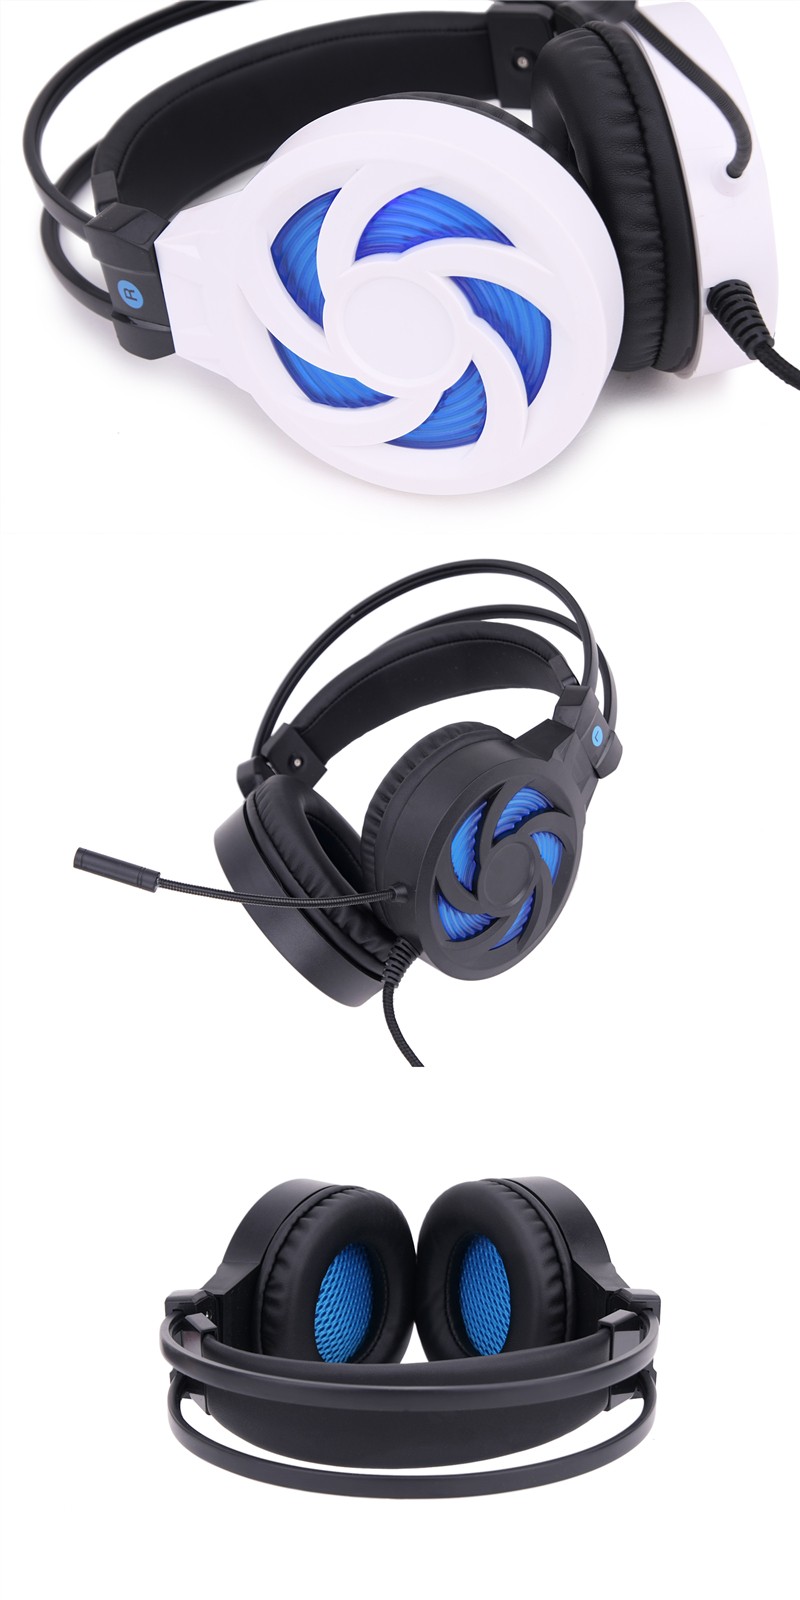 Hi-Fi Microphone Bass Stereo Sounds Gaming Headset